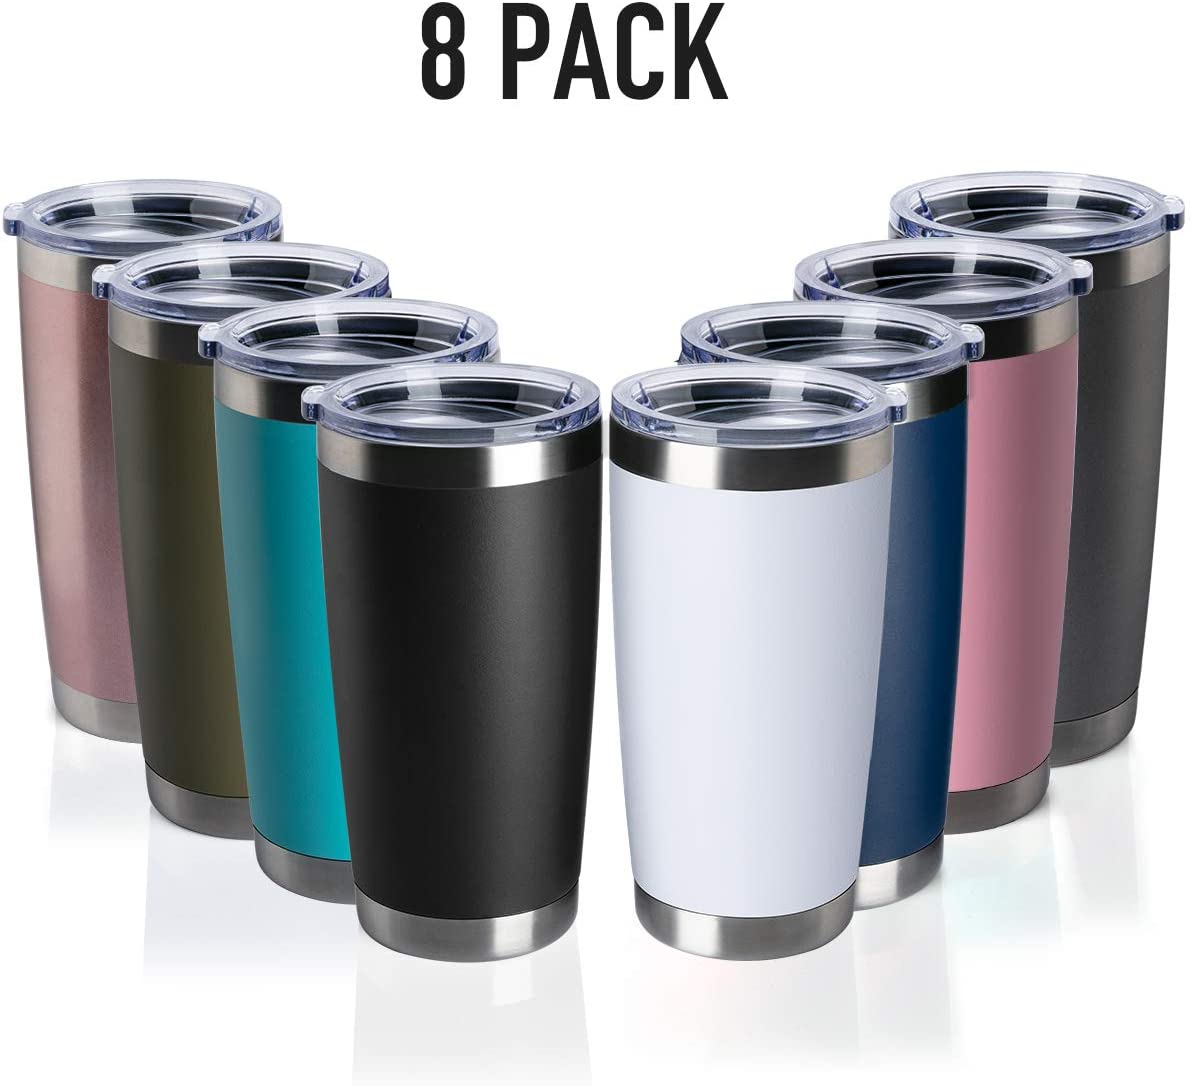 Tdyddyu 8 Pack 20 Oz Double Wall Stainless Steel Vacuum Insulated Tumbler Coffee Travel Mug With